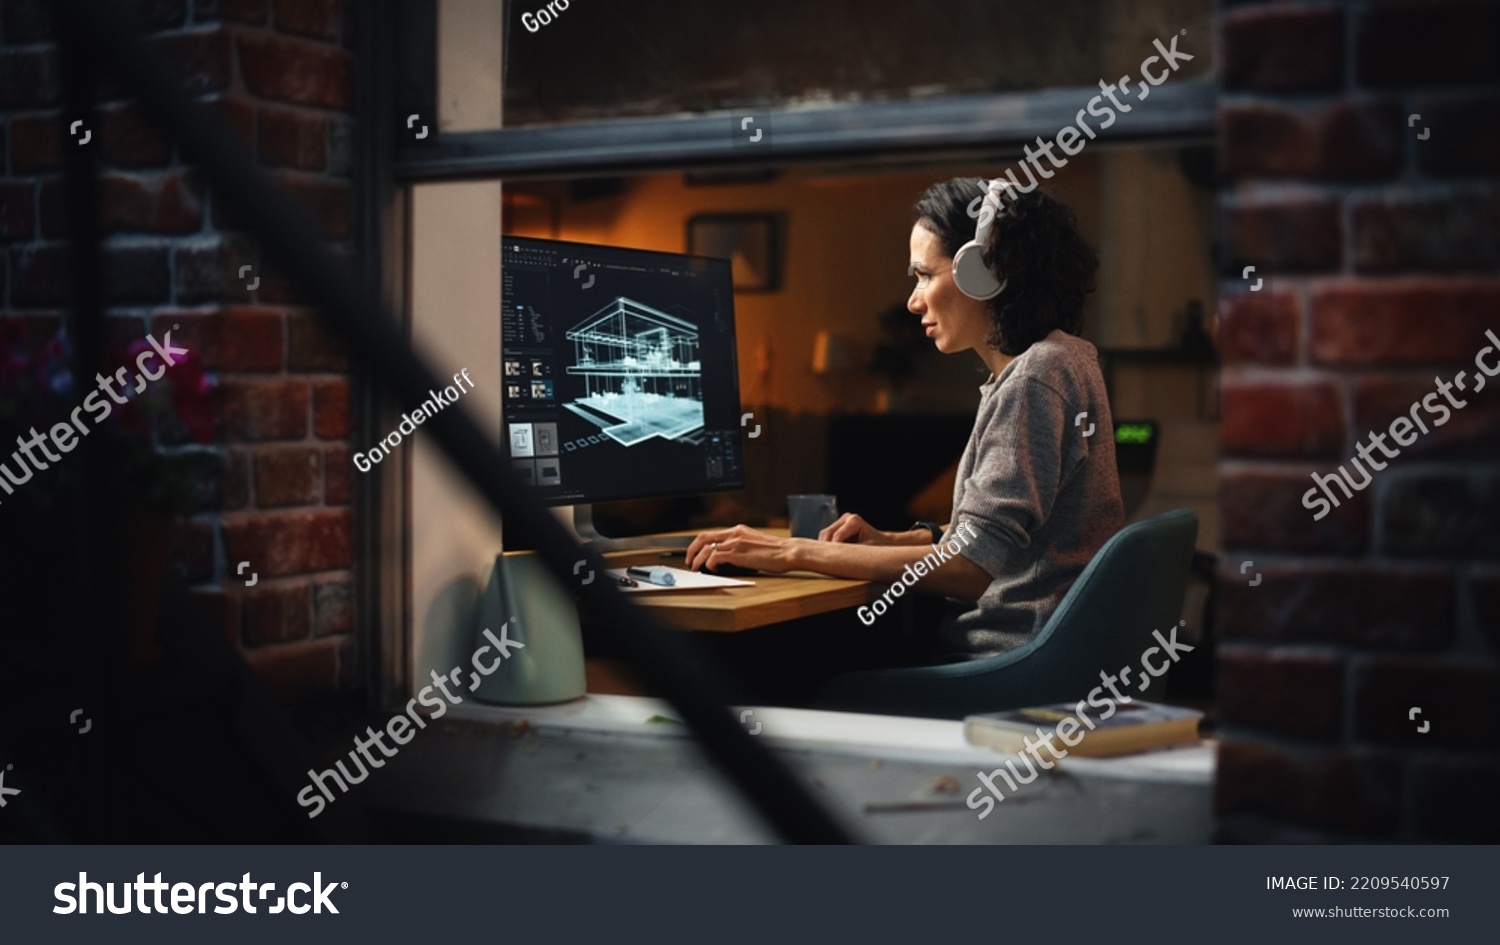 Creative Female 3D Architect Artist Using Desktop Computer with Screen Showing CAD Real Estate Project. Brazilian Woman Video Game Developer Creating Gaming Level. View Into the Apartment Window. #2209540597